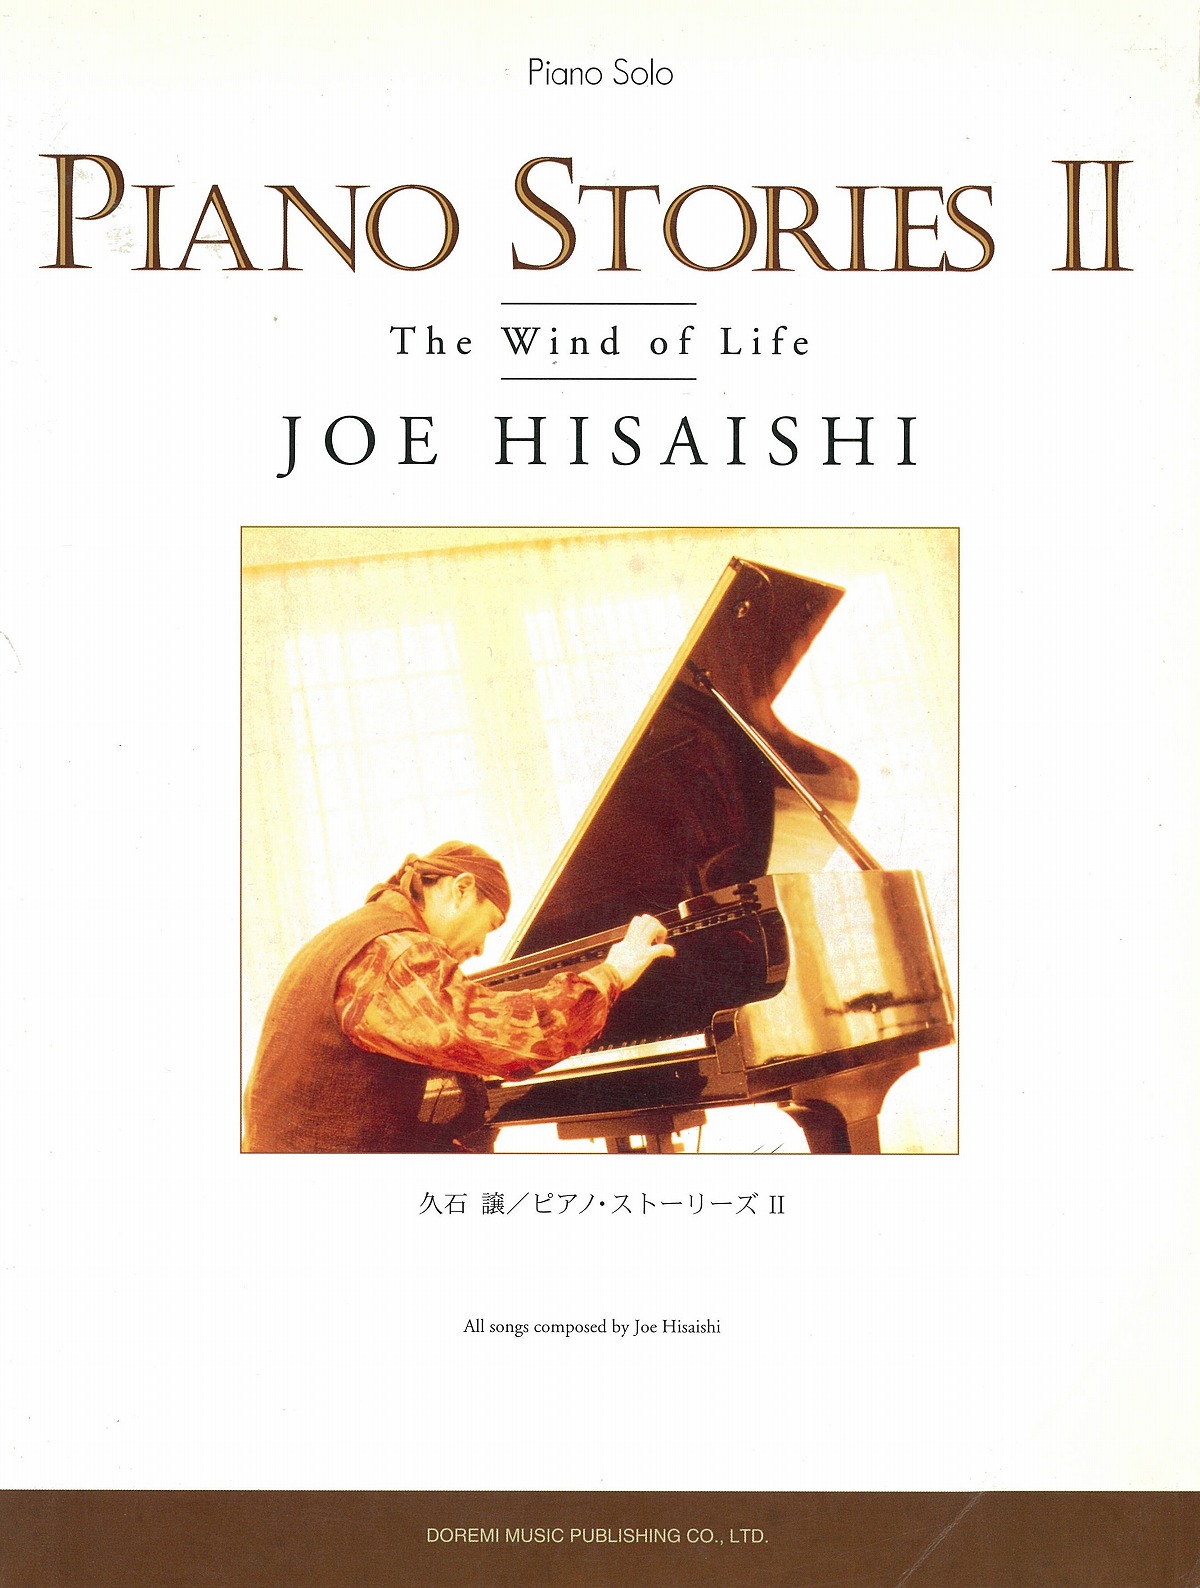 Score. 『久石譲 PIANO STORIES II ～The Wind of Life～』 – 久石譲